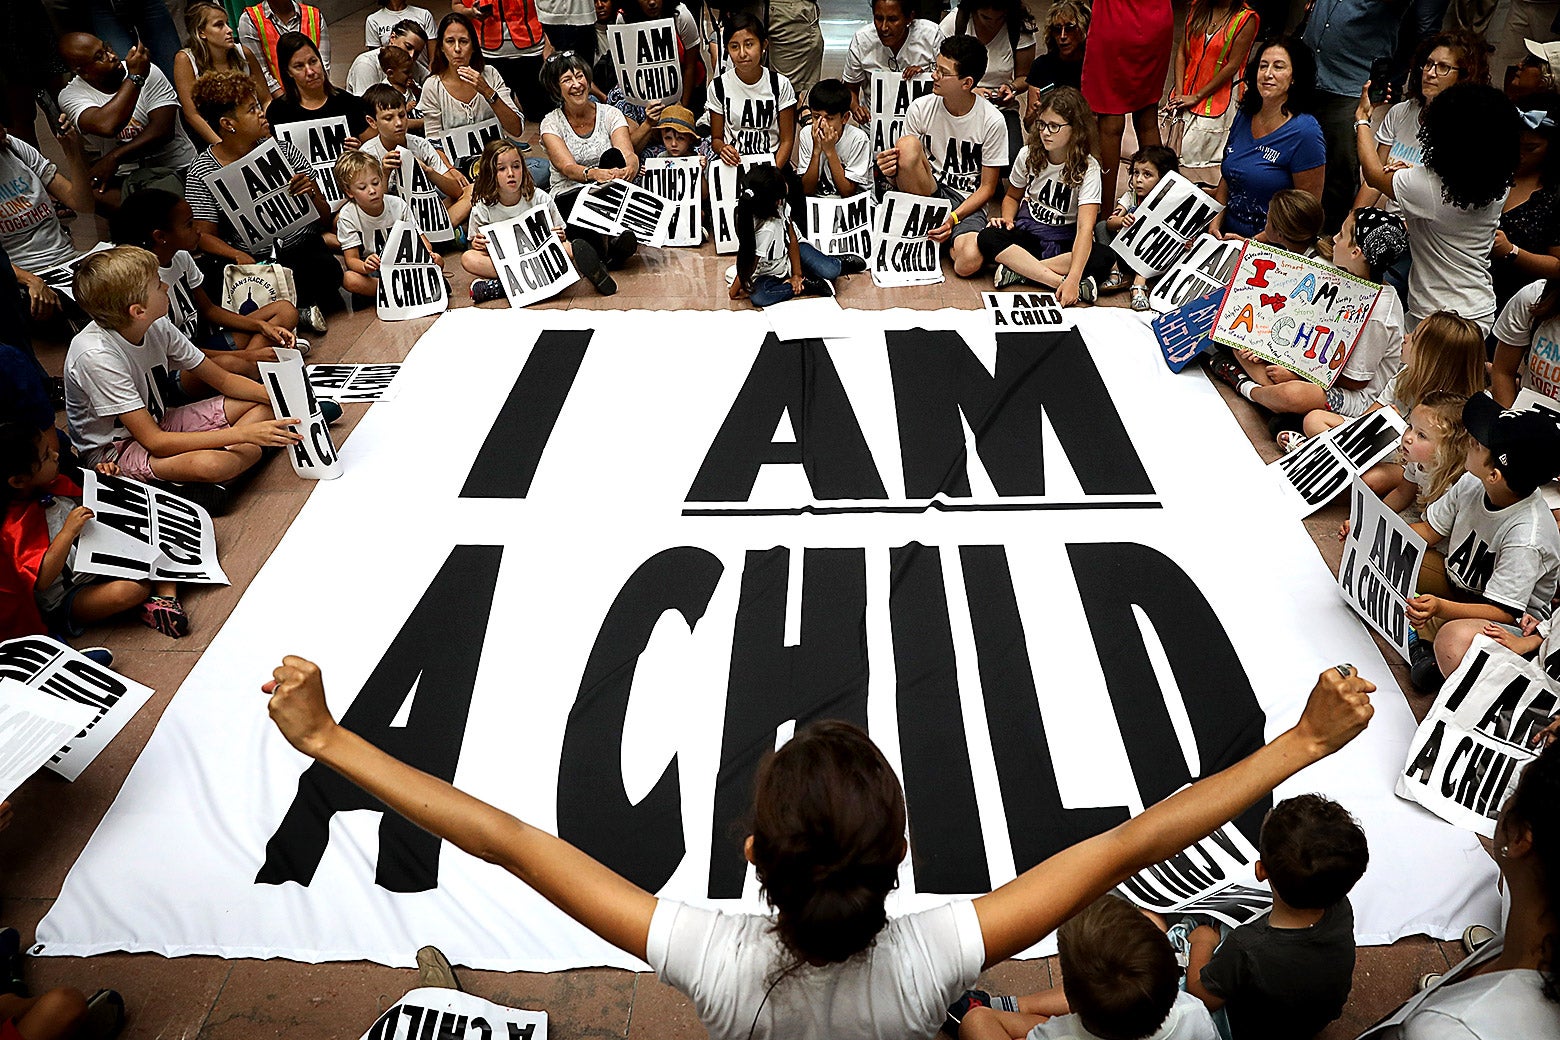 People sit around a large sign that says, "I am a child."